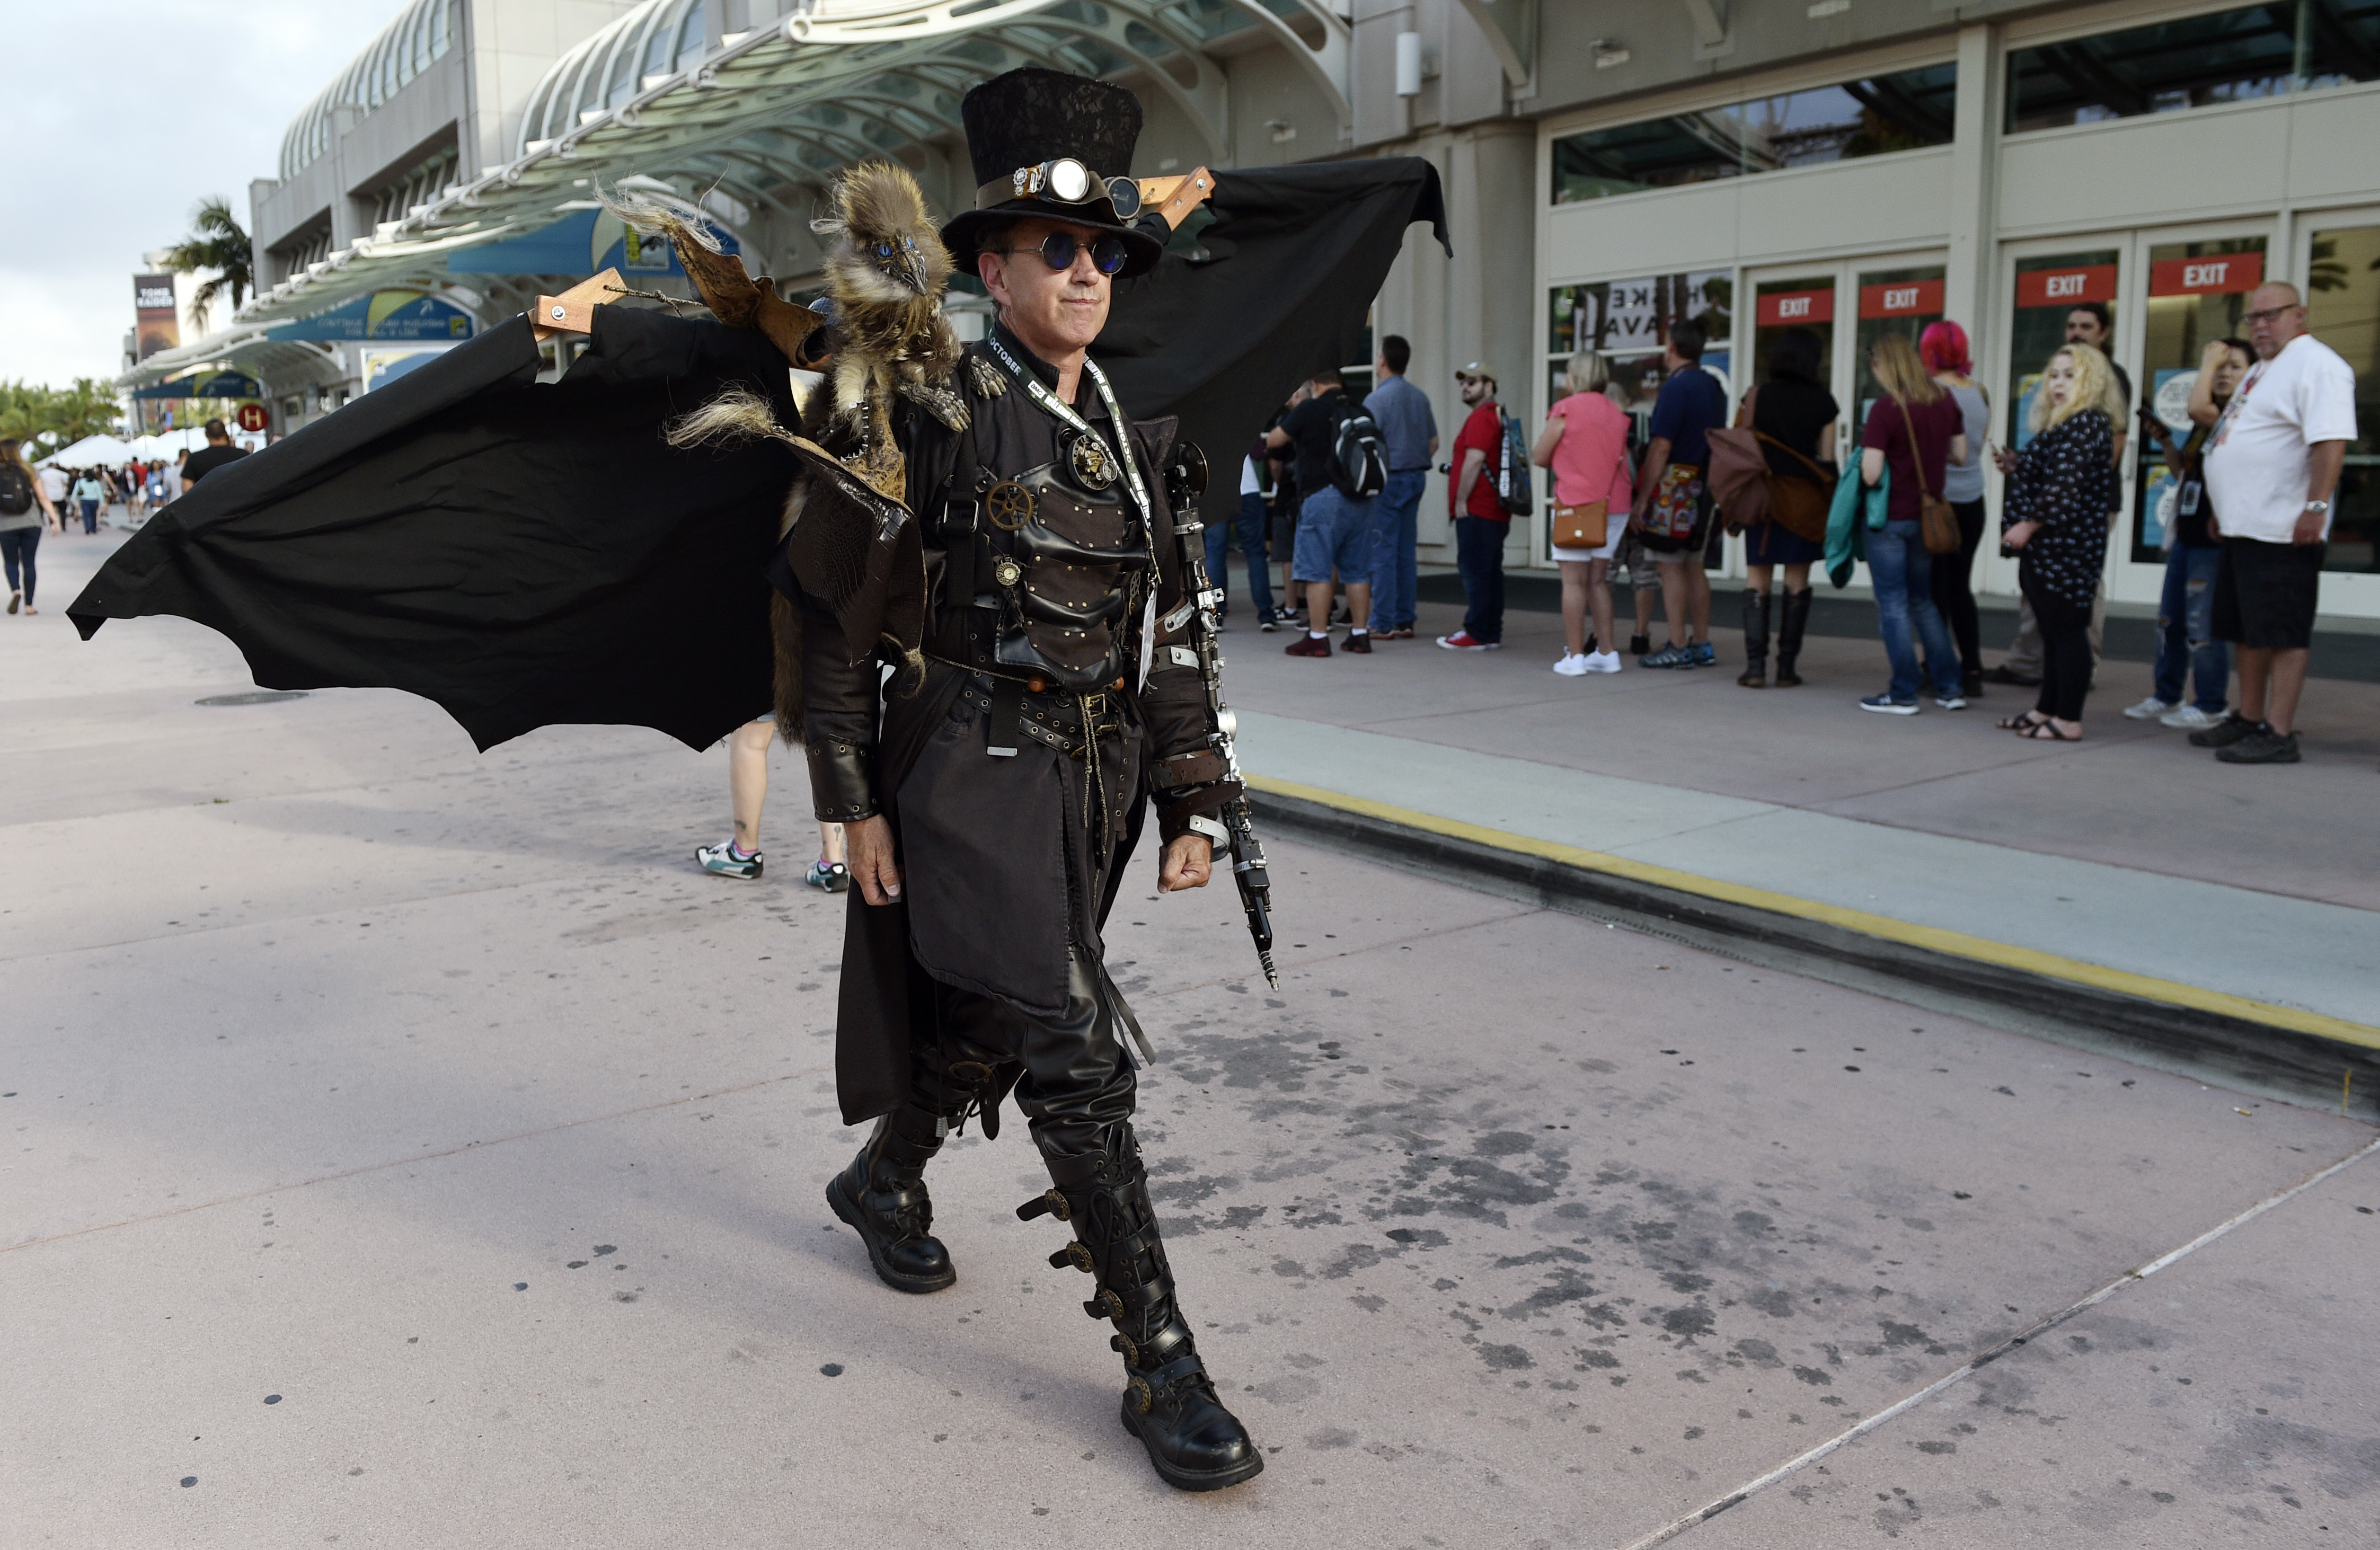 Dean LeCrone, of San Diego, wears his Dr. Artemus Peepers costume as he walks past attendees to Preview Night of the 2018 Comic-Con International at the San Diego Convention Center, Wednesday, July 18, 2018, in San Diego. LeCrone said that this was his 28th Comic-Con. (Photo by Chris Pizzello/Invision/AP)